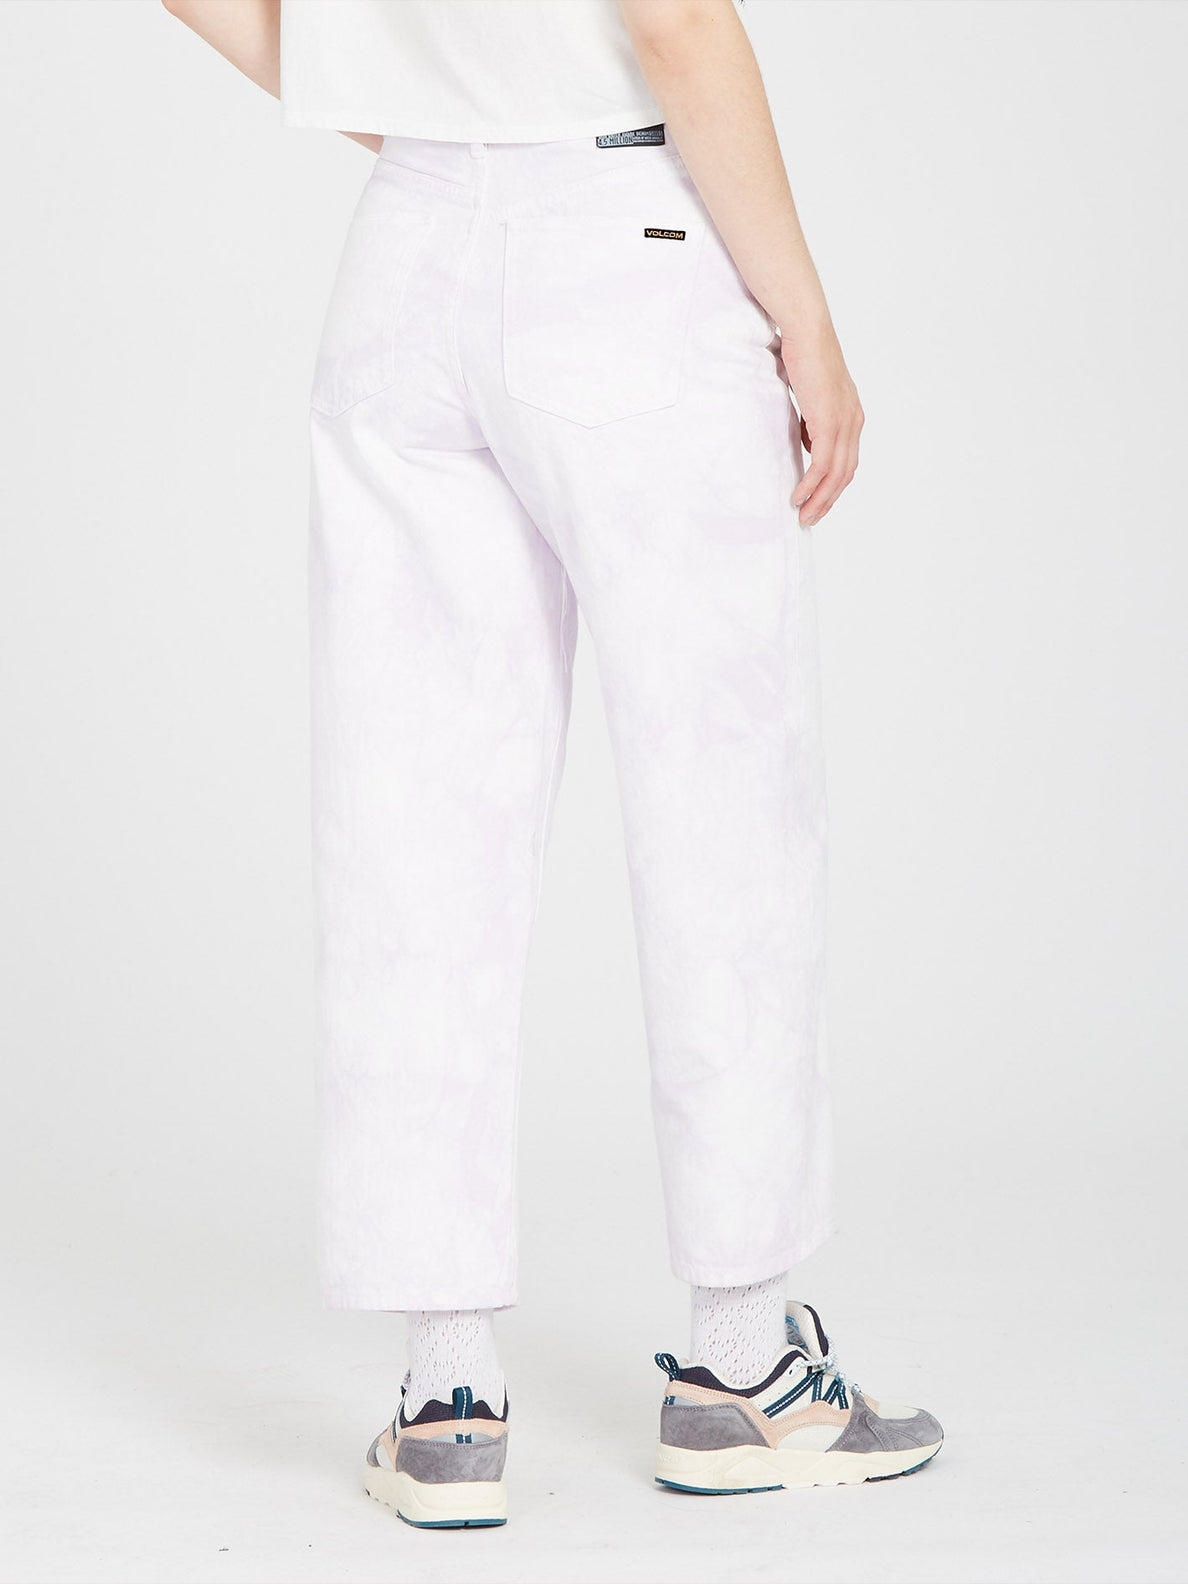 Weellow Jeans - LIGHT ORCHID (B1912301_LOR) [B]